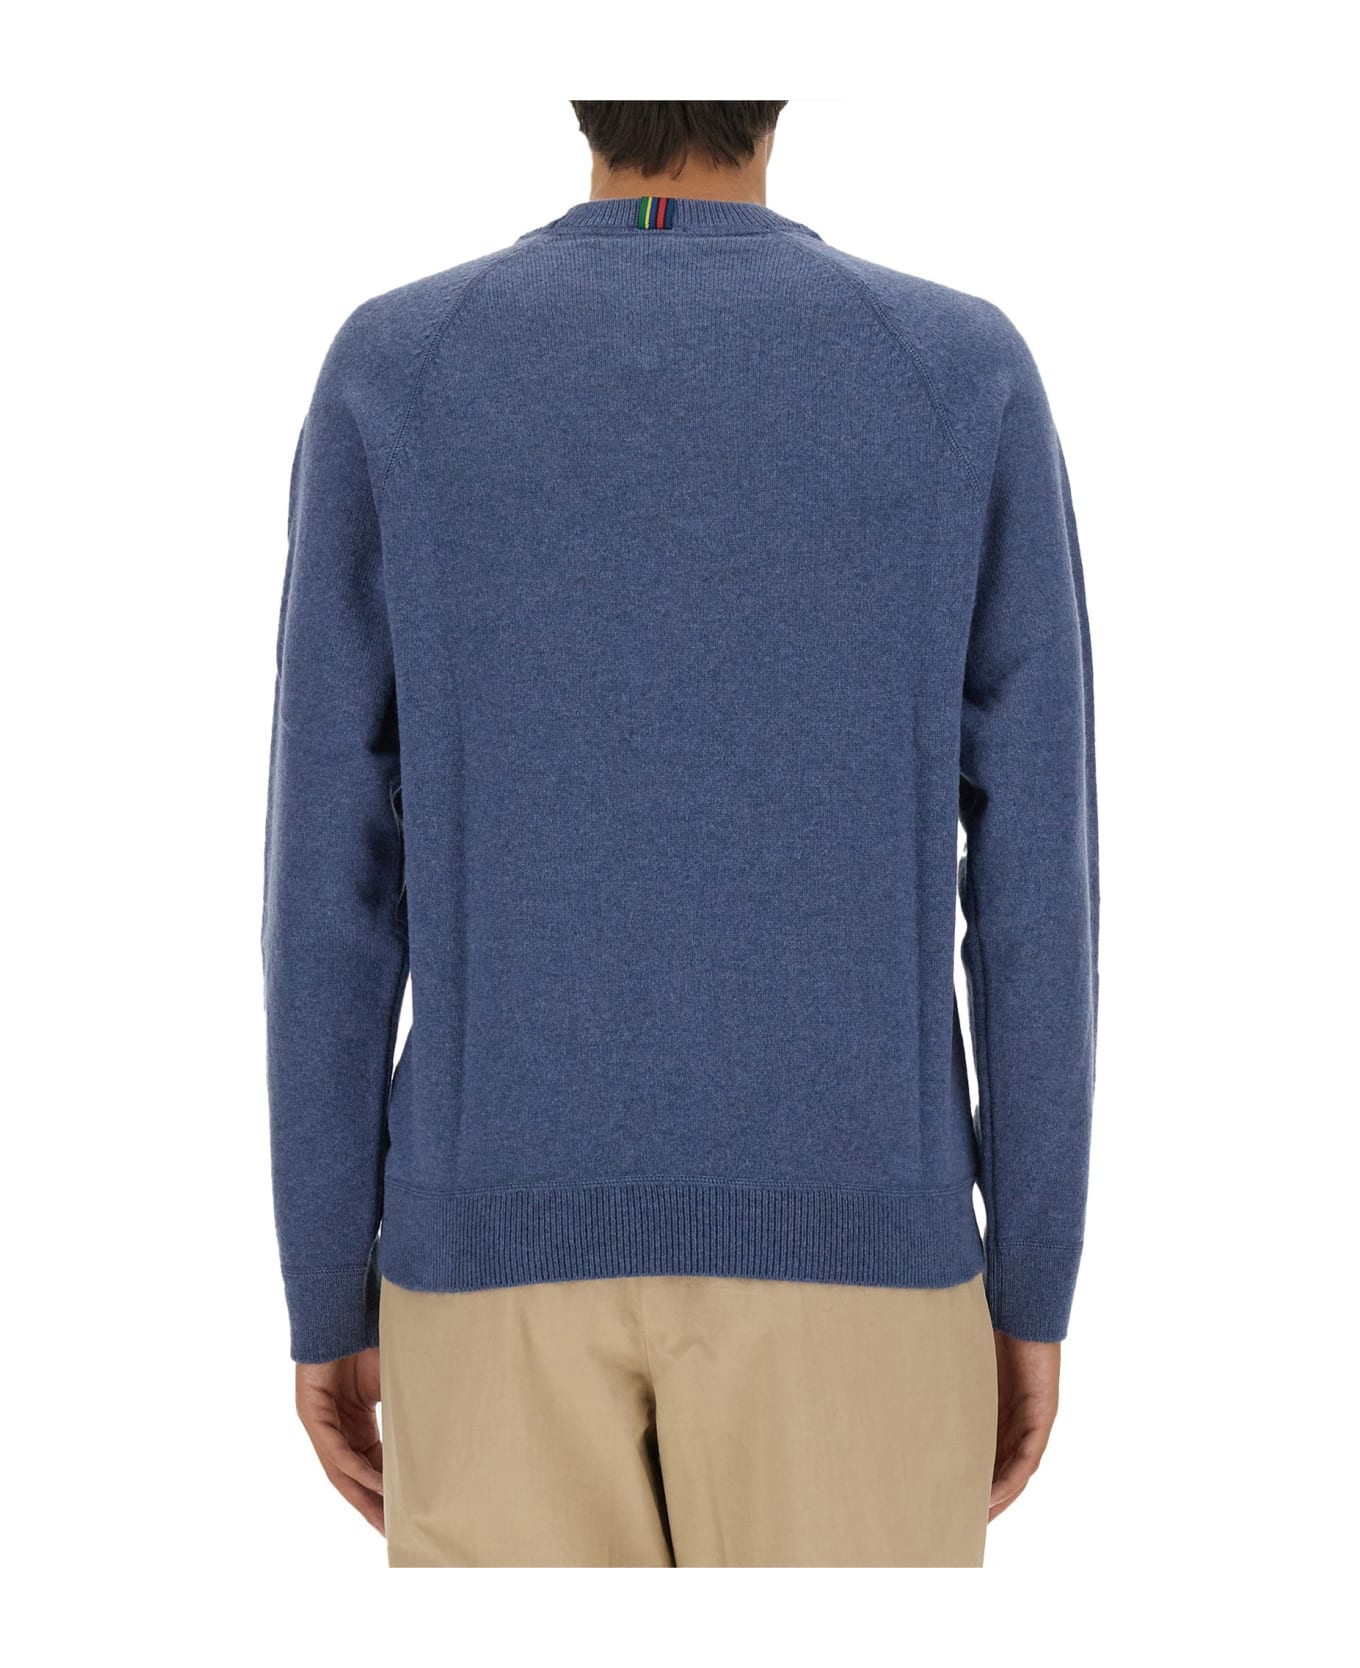 PS by Paul Smith Wool Jersey. Sweater - GREYISH BLUE ニットウェア